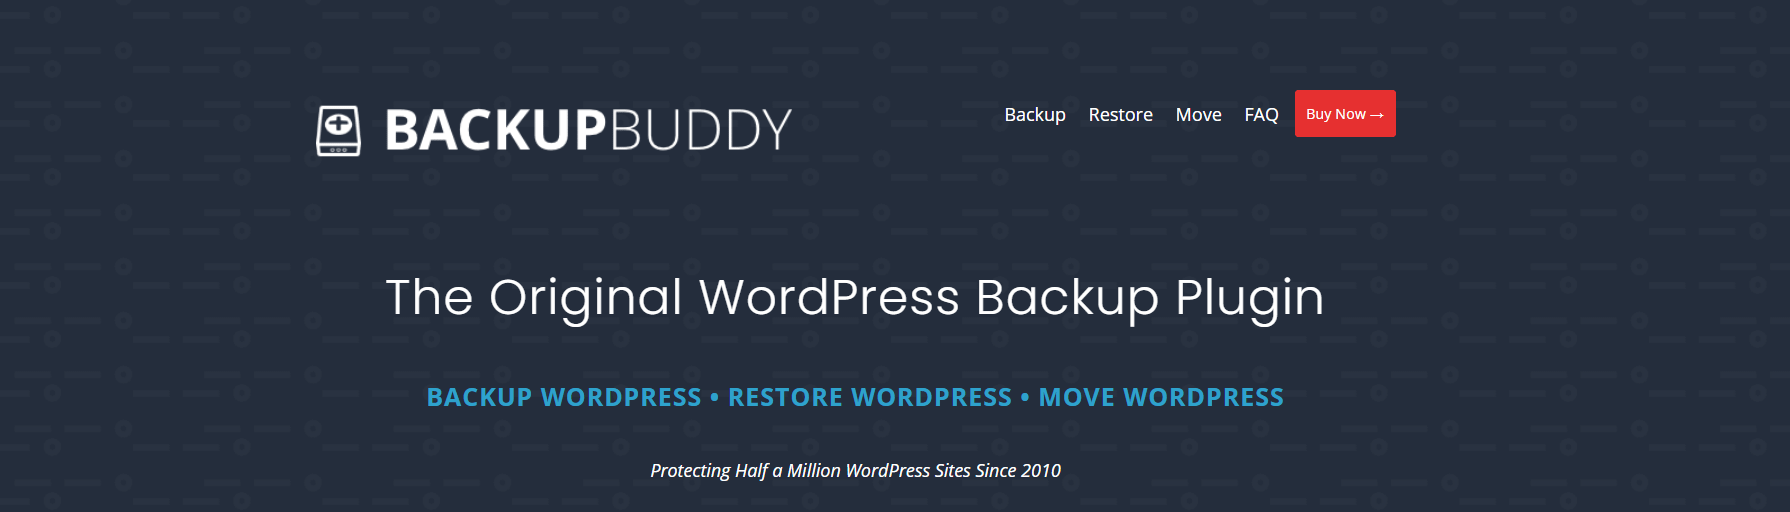 Backup Buddy is a complete WordPress migration plugin with the option to backup and move your website. 